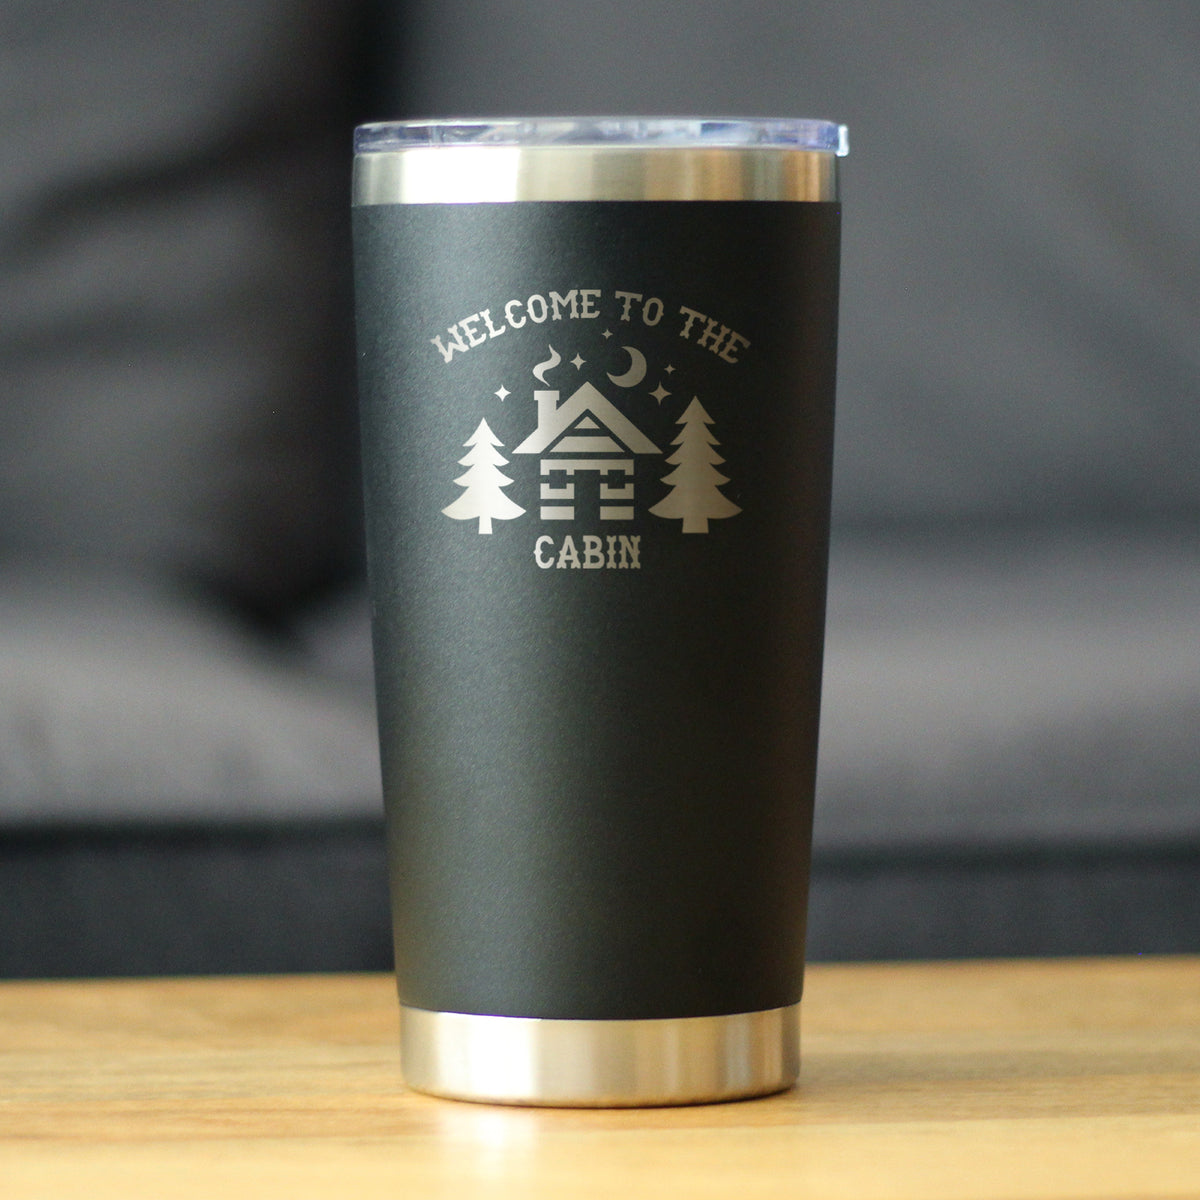 Welcome To The Cabin - Insulated Coffee Tumbler Cup with Sliding Lid - Stainless Steel Travel Mug - Unique Cabin Themed Gift for Women and Men